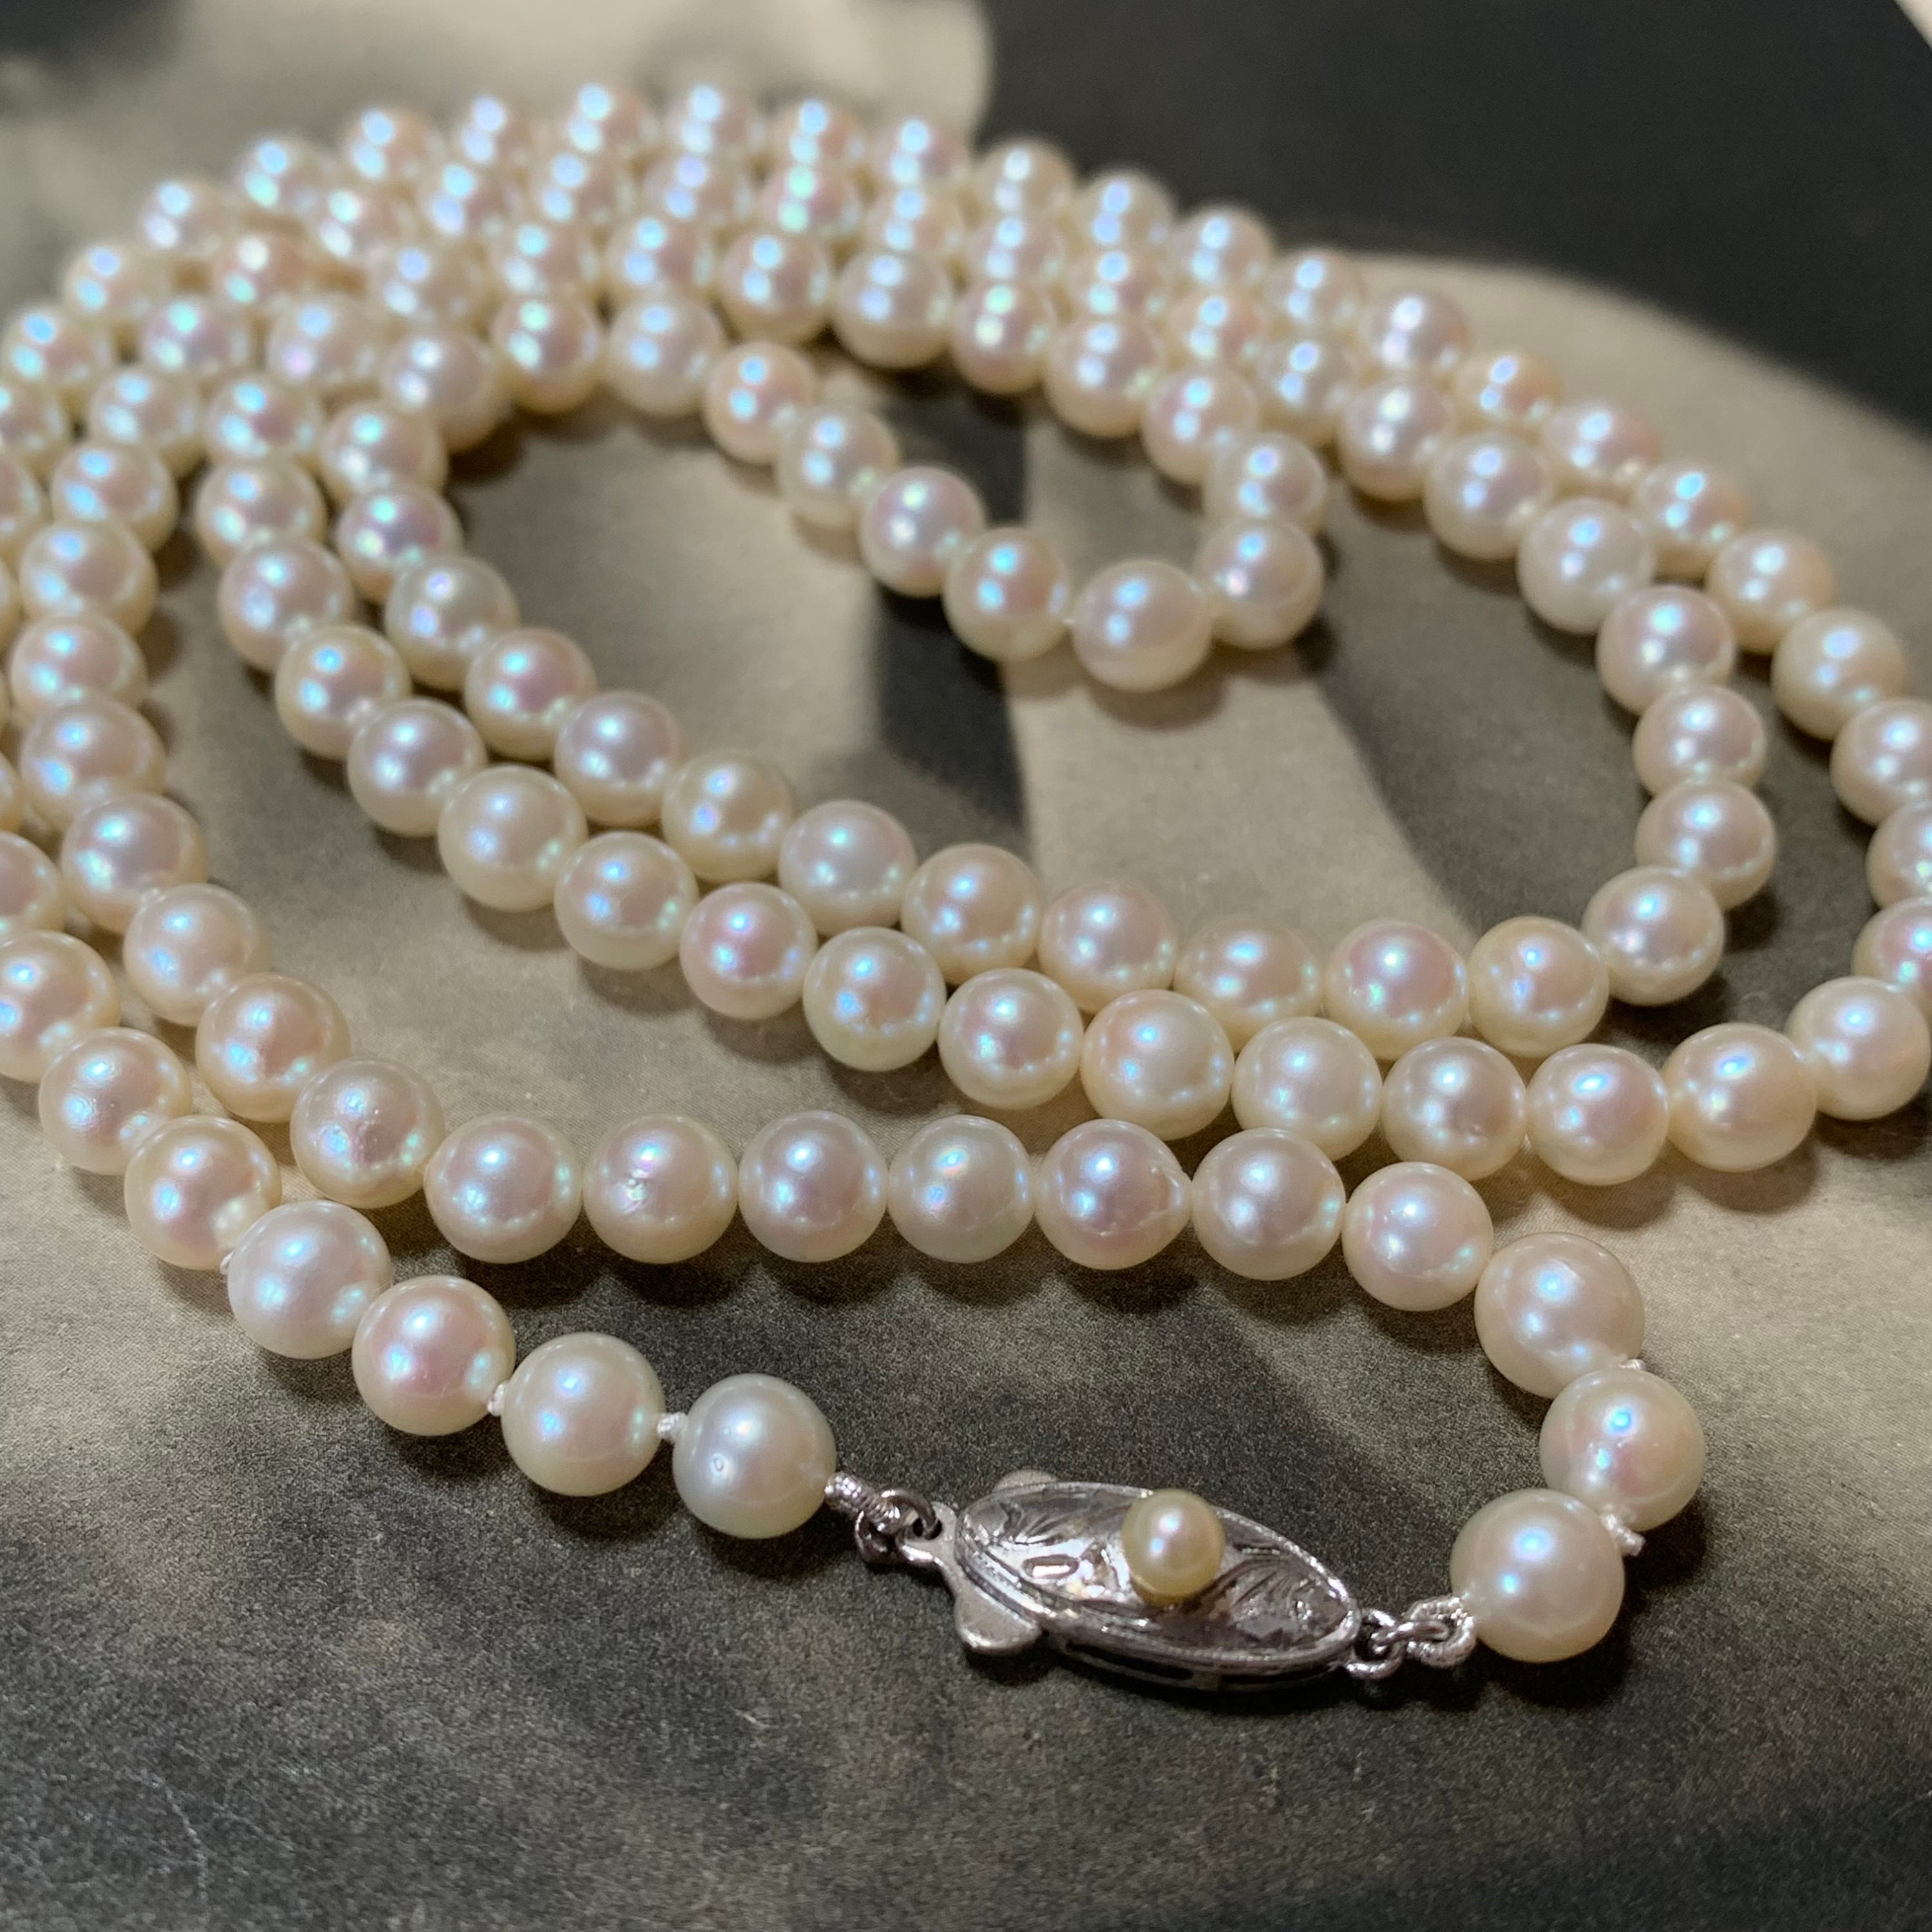 This Beautiful Necklace Features 121 Well-Matched Pearls, Each Approximately 5.5mm in Size With Brilliant Luminosity & A Bright Lustre